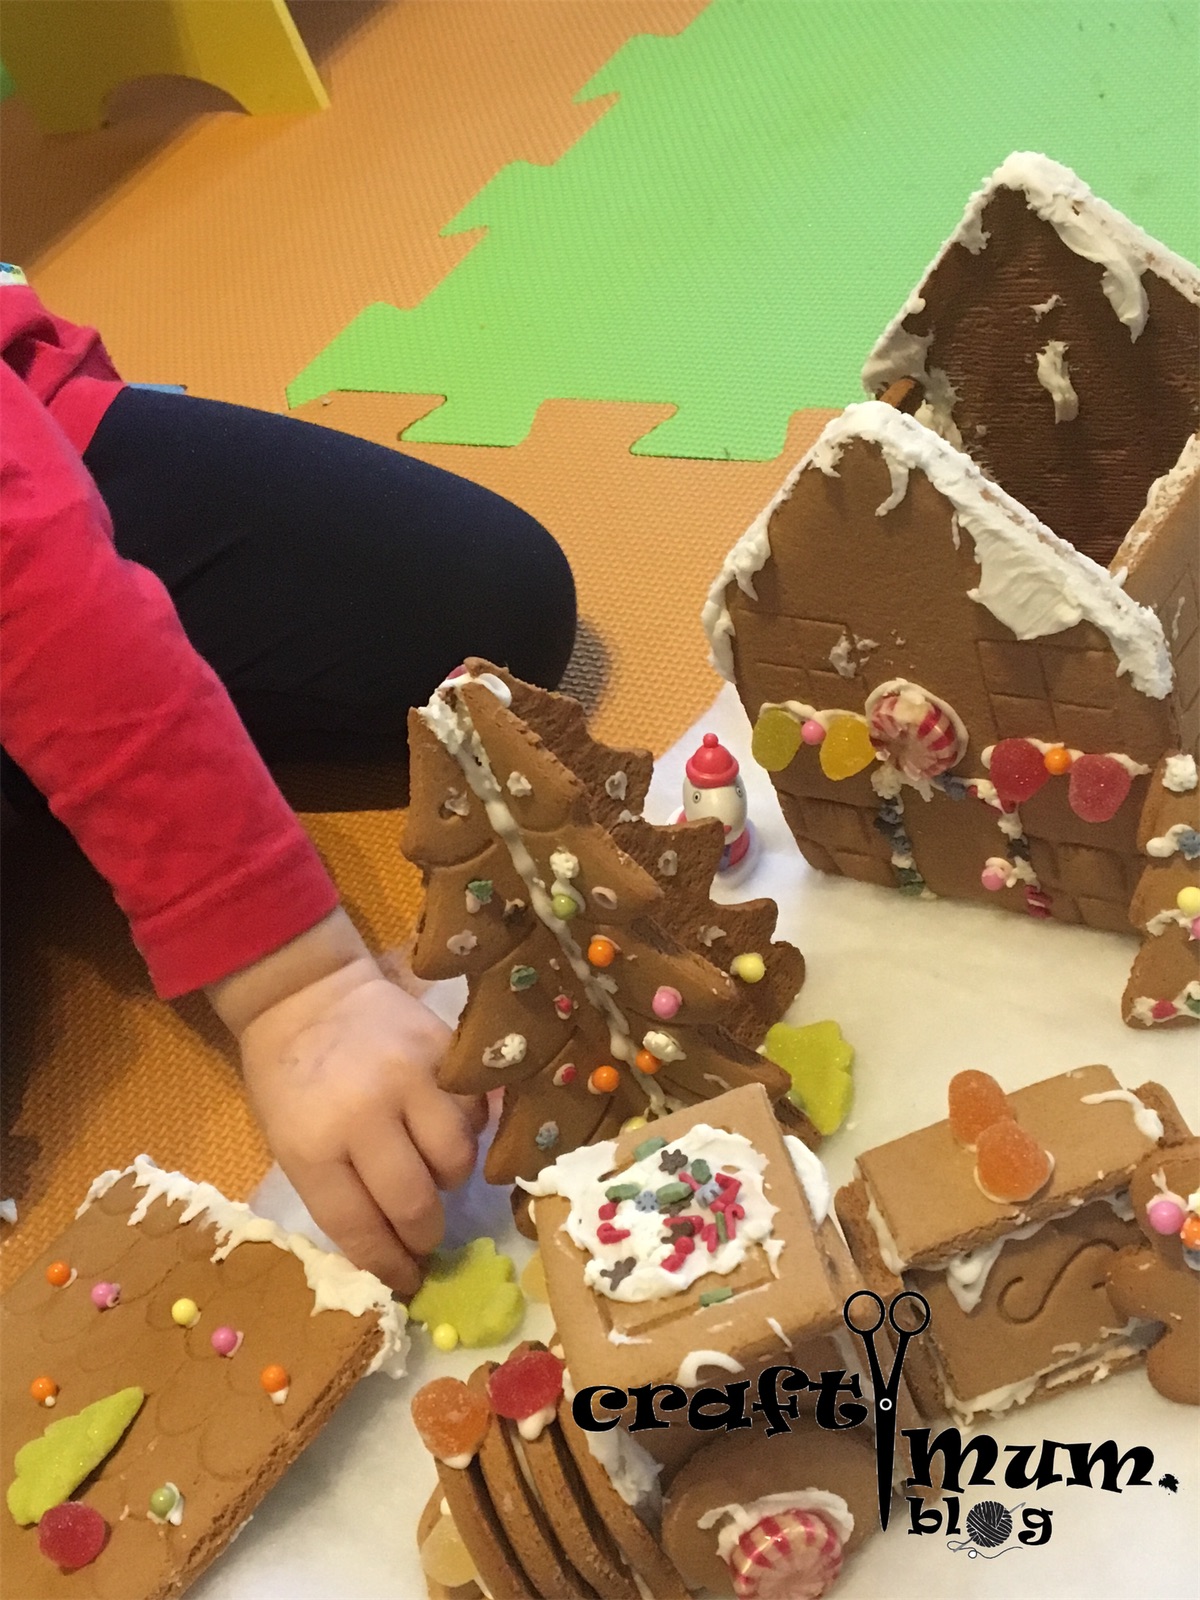 Gingerbread house for Peppa Pig